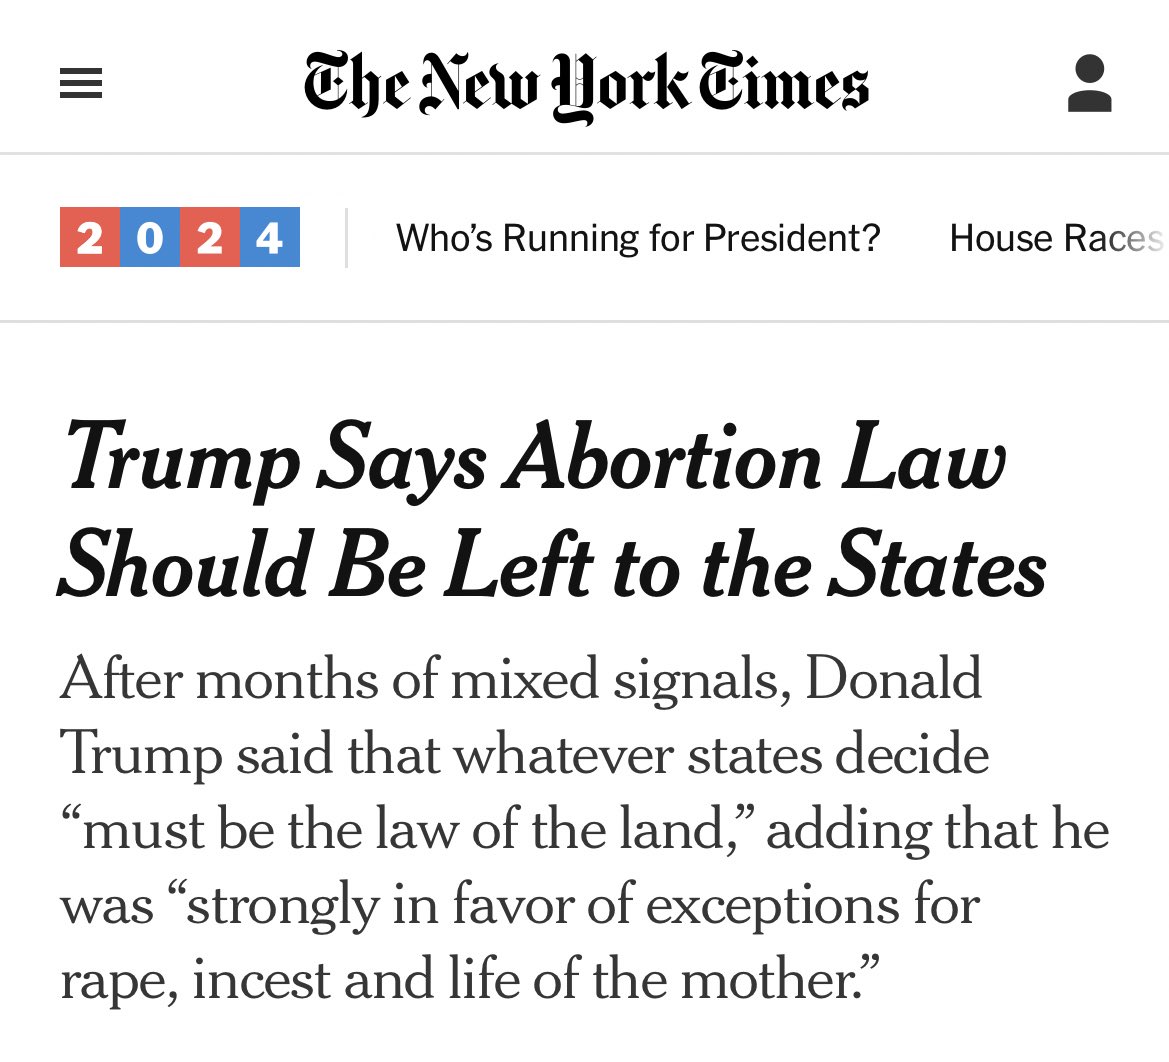 So, for instance, this headline is incorrect. An accurate version would be: ‘Trump acknowledges abortion law up to states, does not explicitly say whether or not he’d sign a ban.’